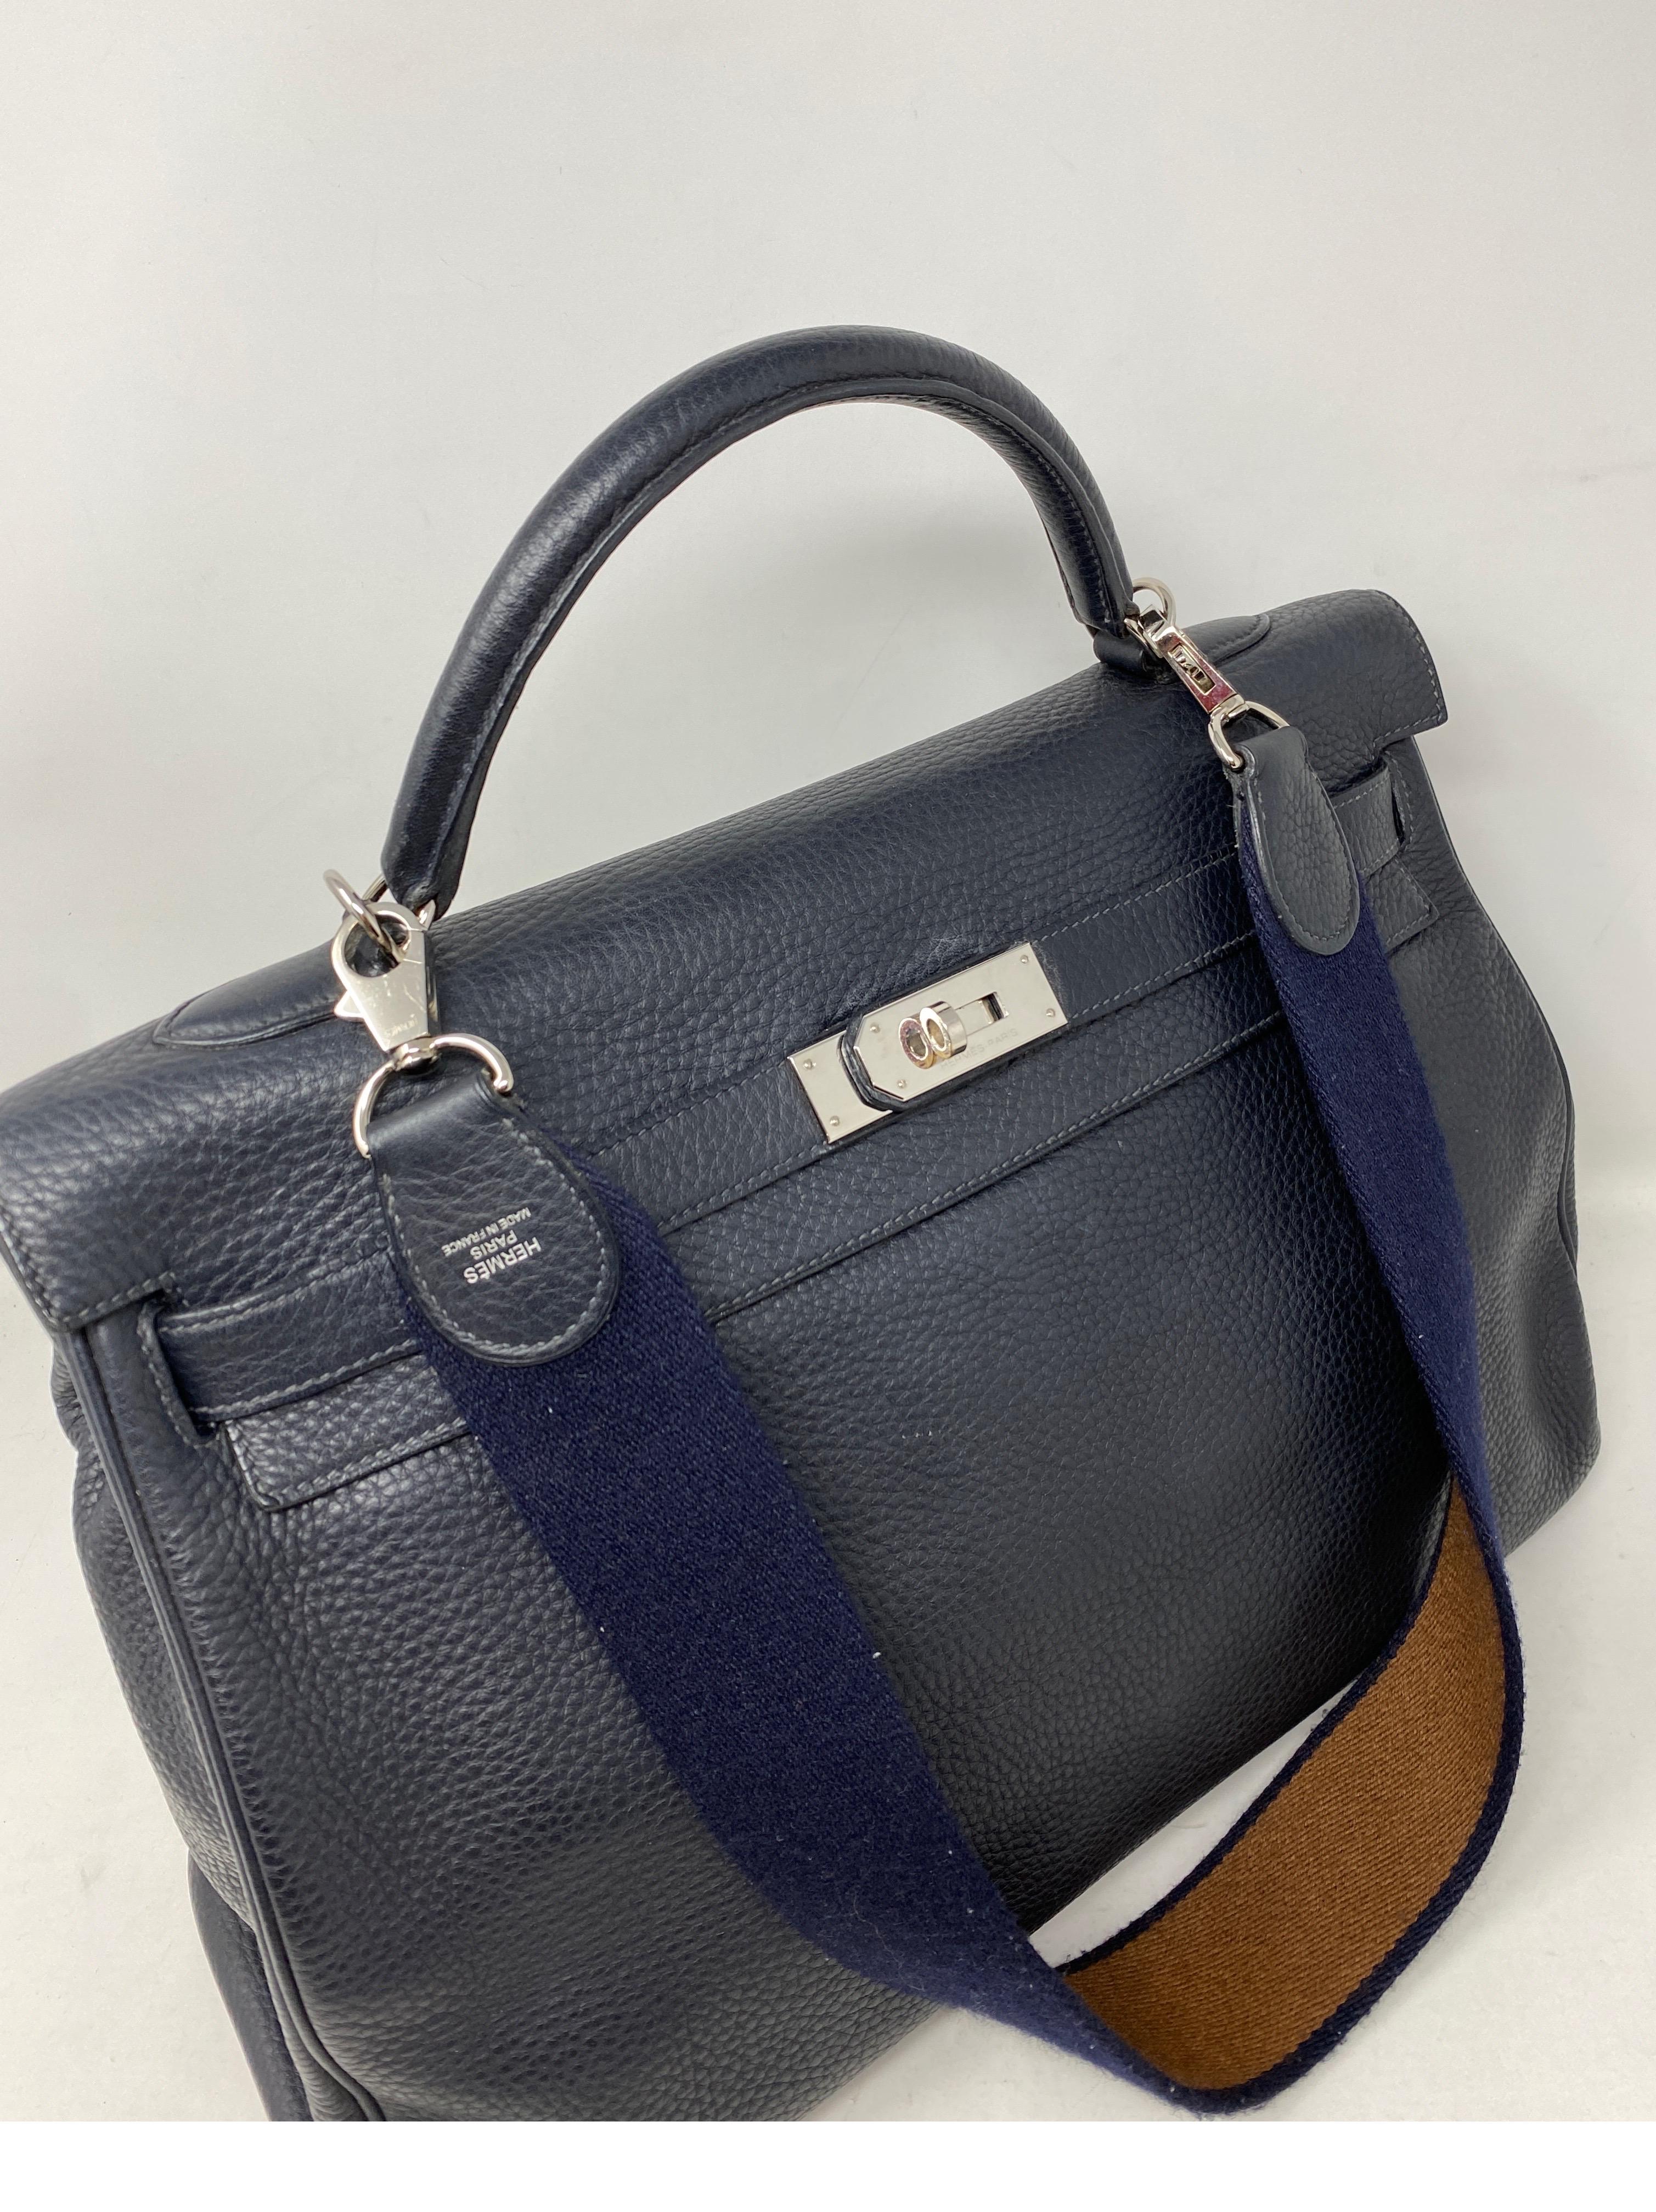 Hermes Kelly 40 Blue Indigo Bag. Palladium hardware. Navy and tan canvas strap. Good condition. Large size Kelly bag. Can be worn with or without strap. Includes clochette, lock, keys and dust cover. O stamp. Guaranteed authentic. 